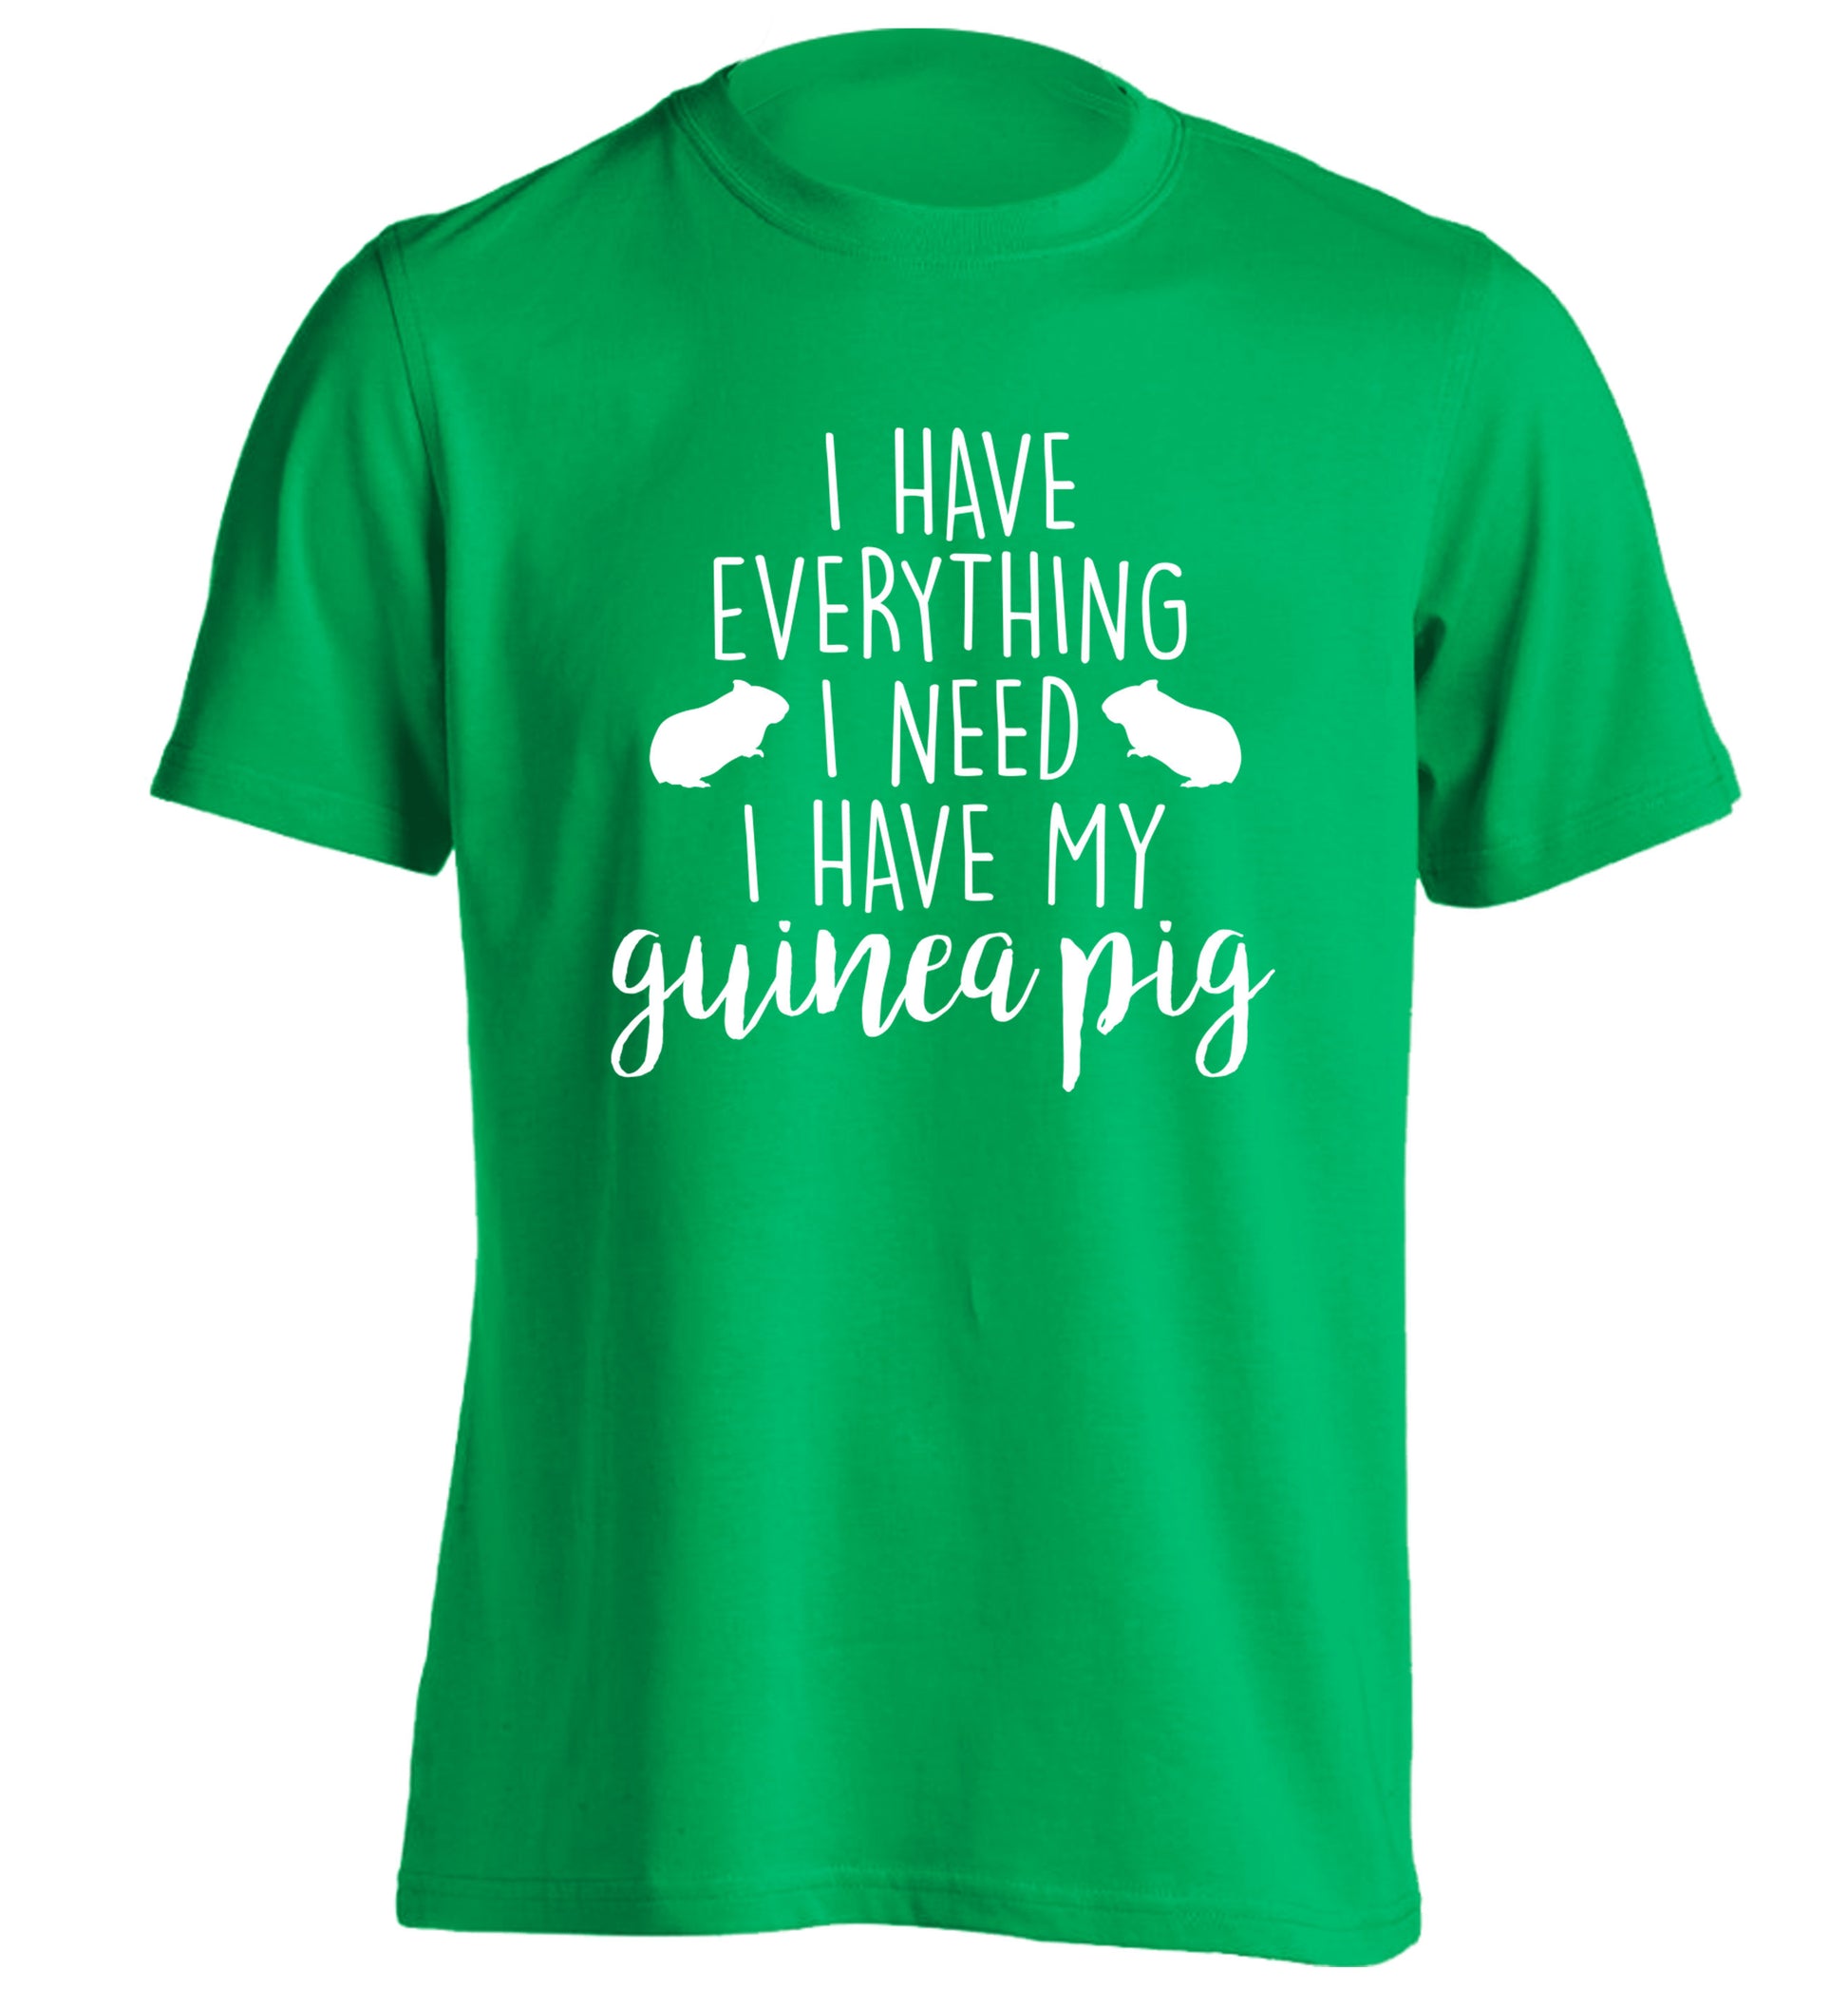 I have everything I need, I have my guinea pig adults unisex green Tshirt 2XL